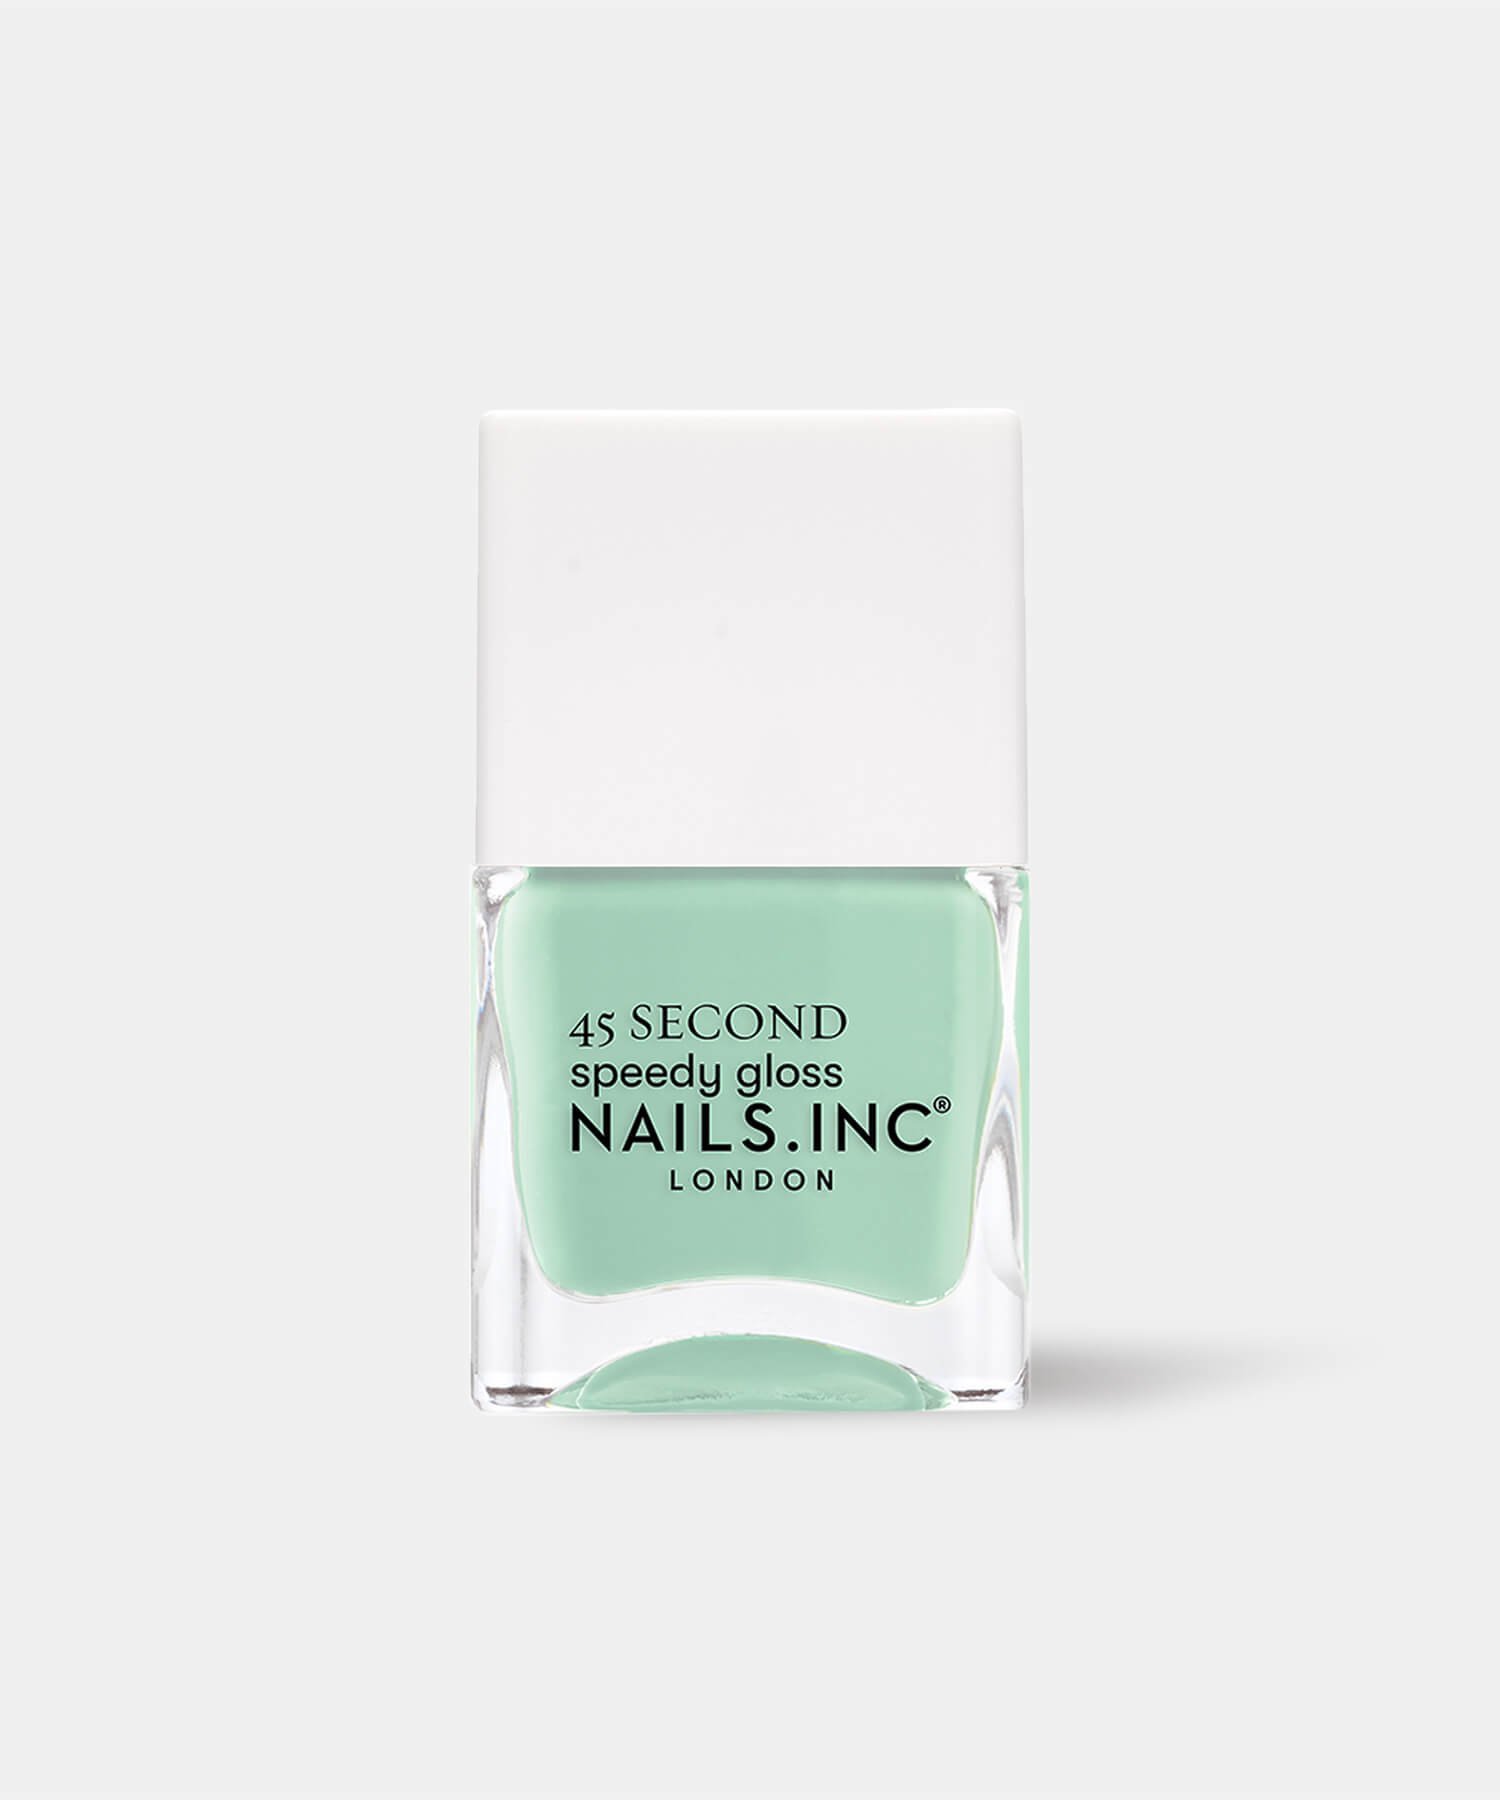 NAILS INC 45 SECOND Wellness In Wimbledon lCY CN lC }jLAElC|bV